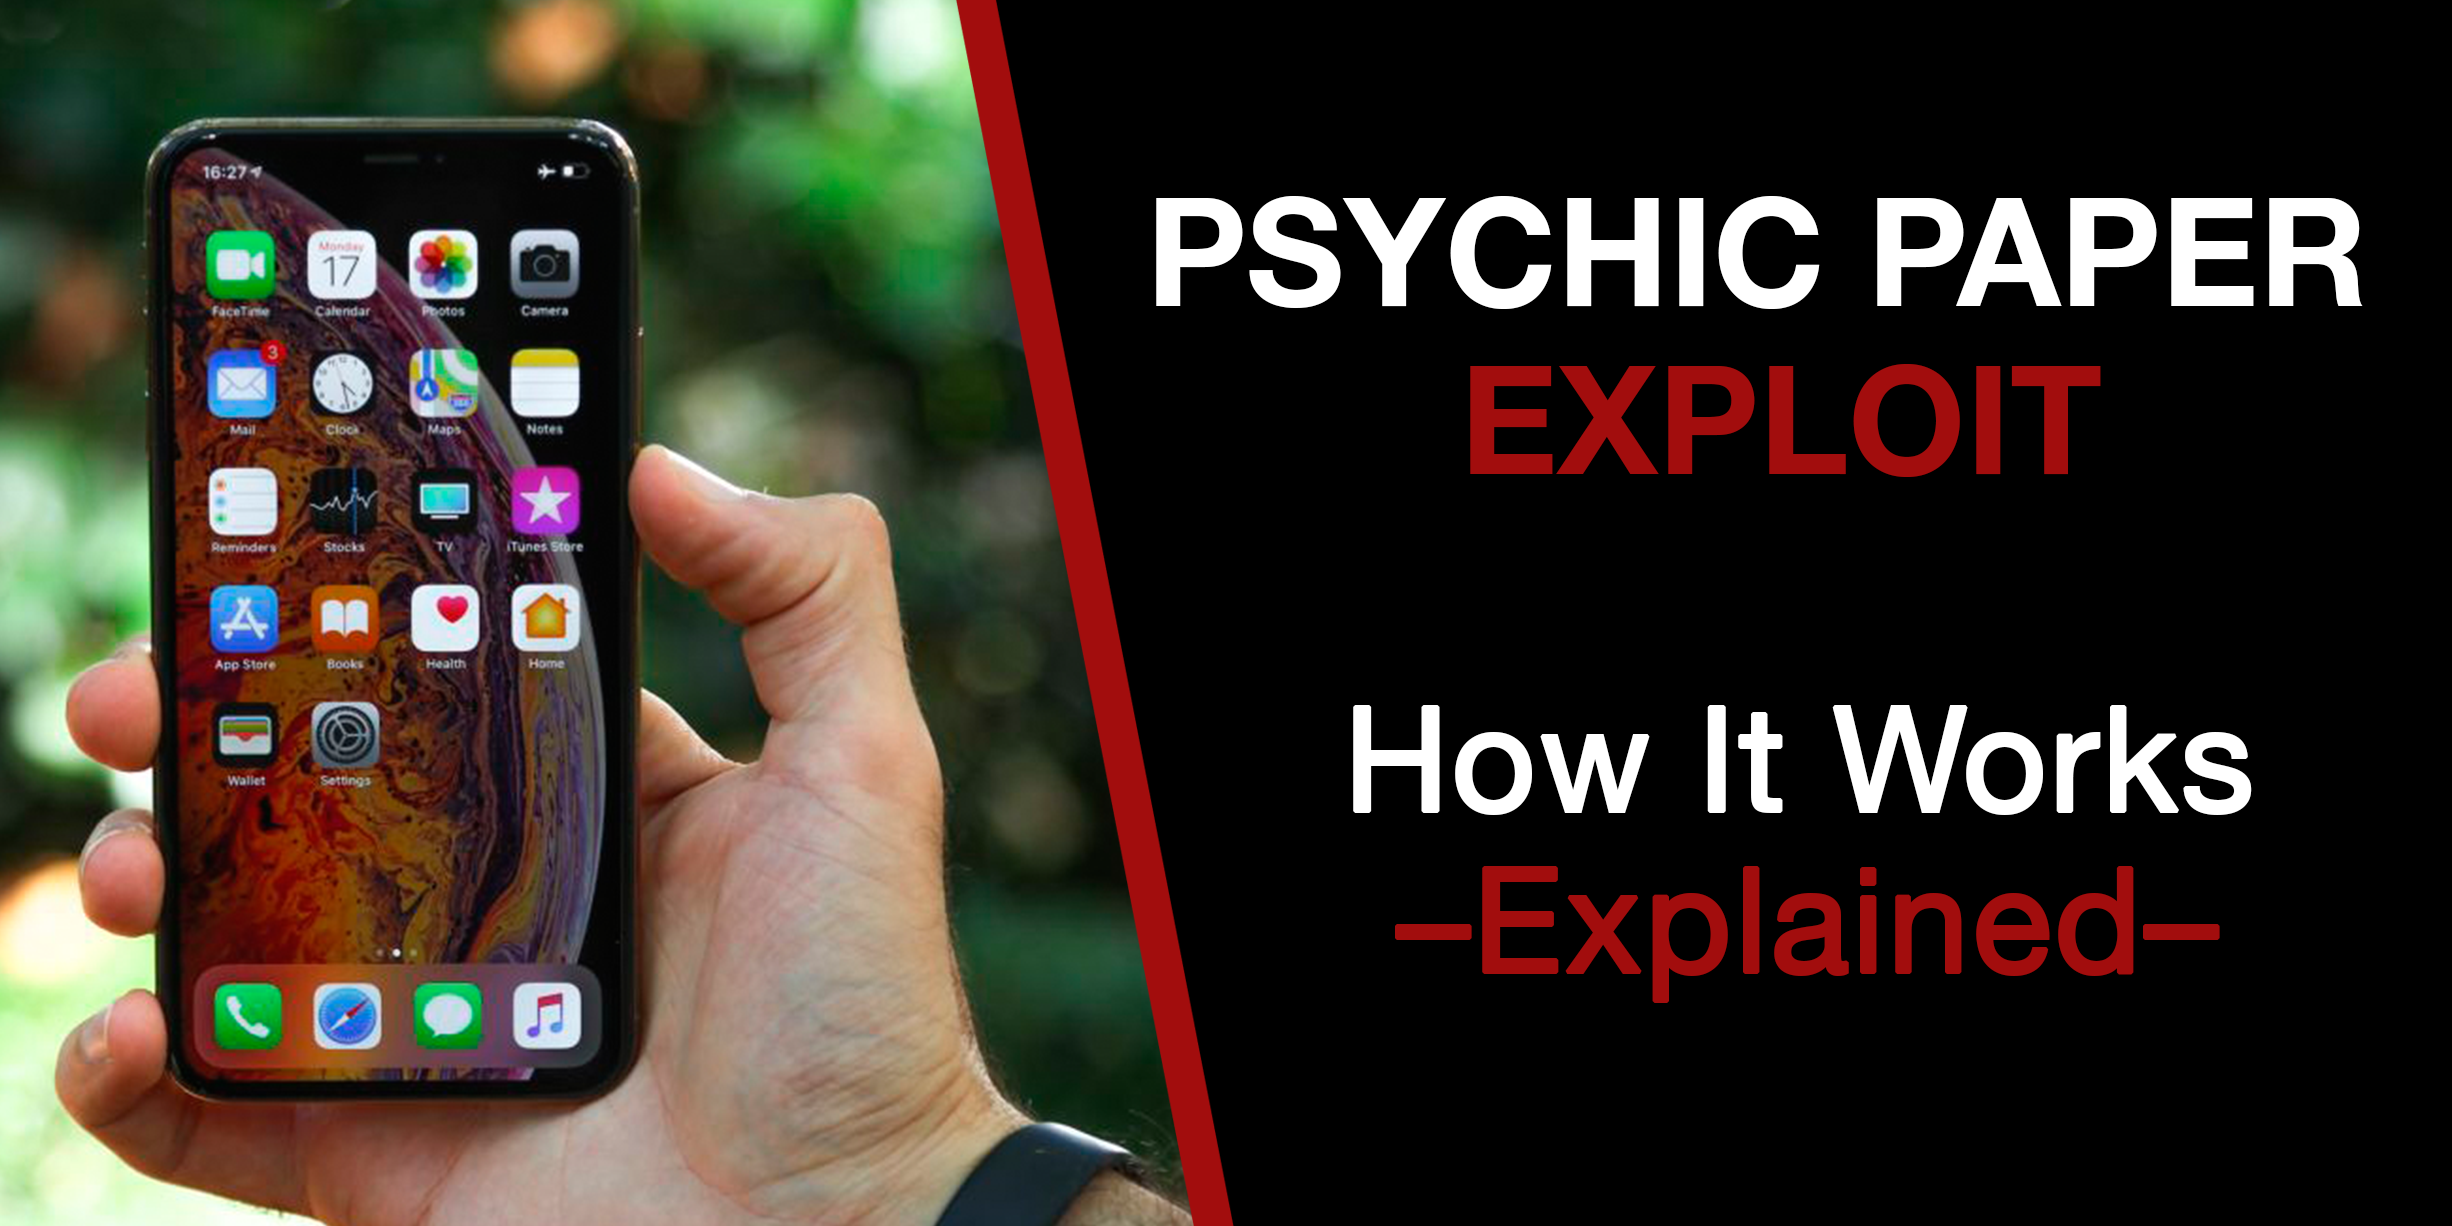 New Zero-Day Psychic Paper Exploit Allows Access to your Entire iPhone